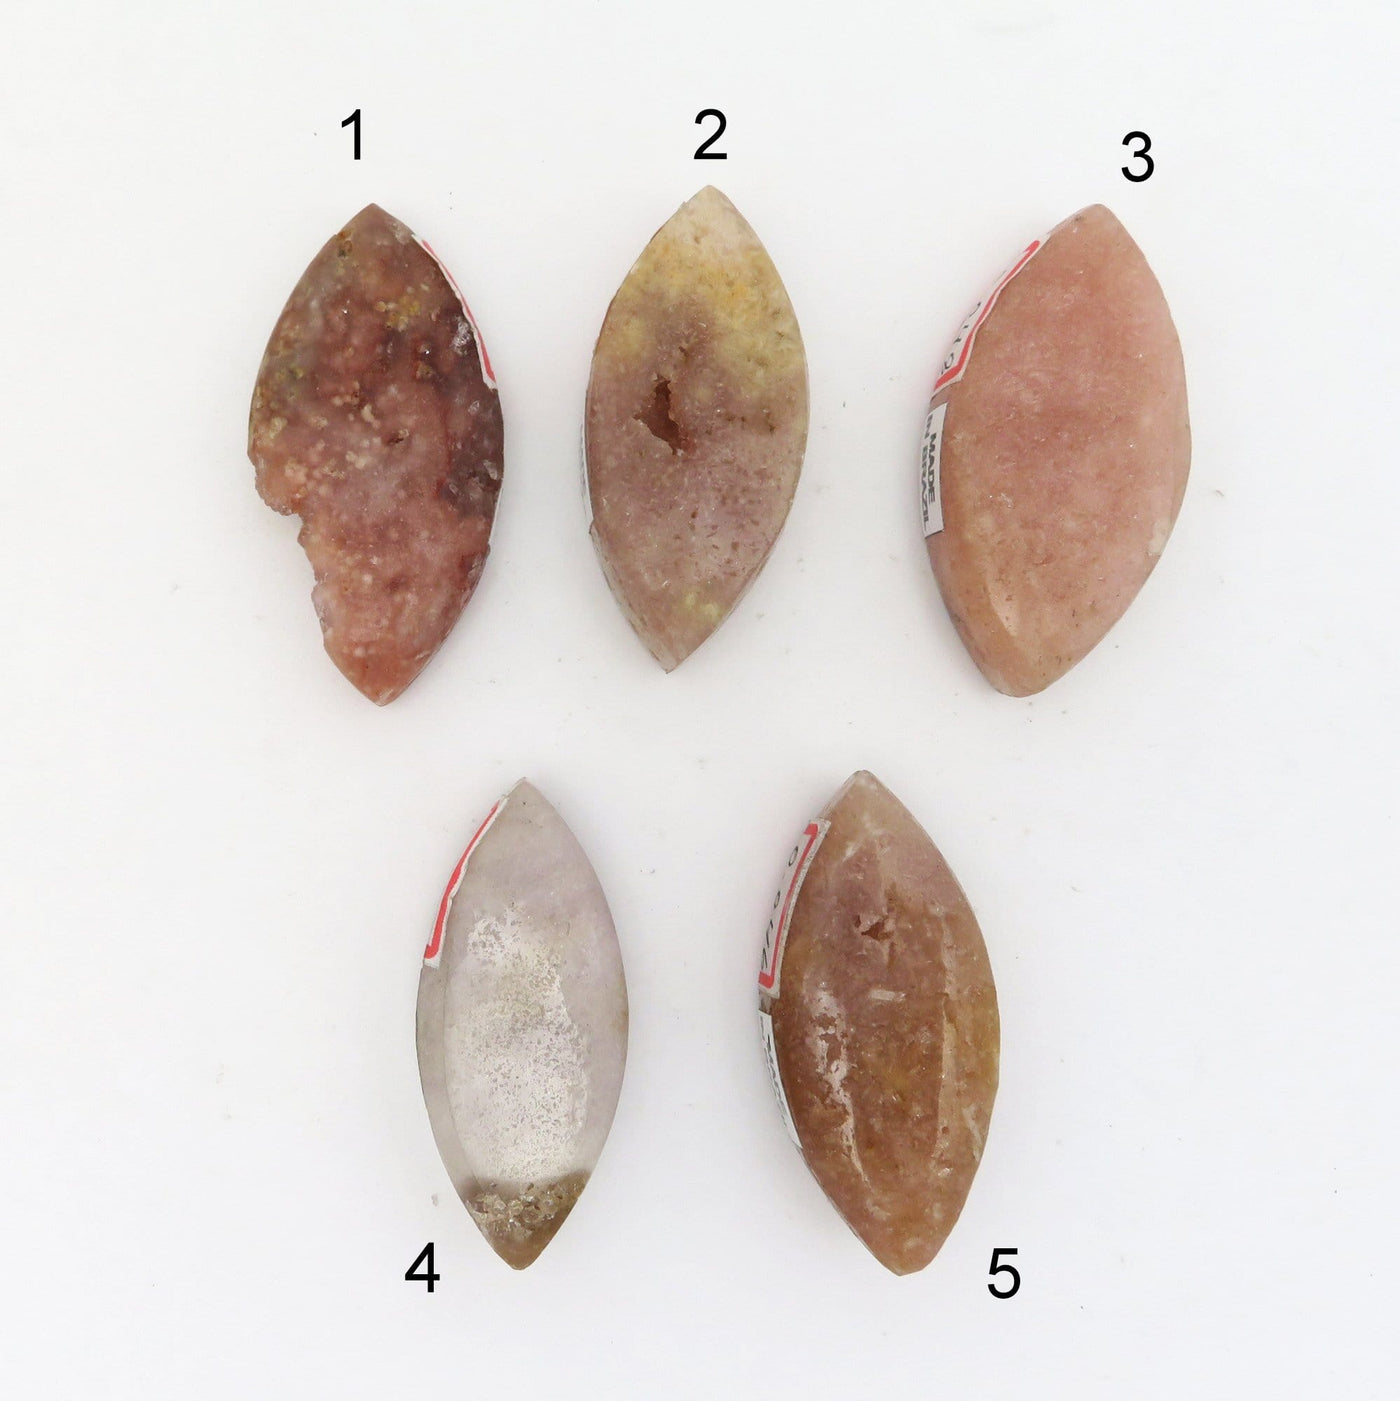 5 different Pink Amethyst Polished Marquise Stone Shapes on white background